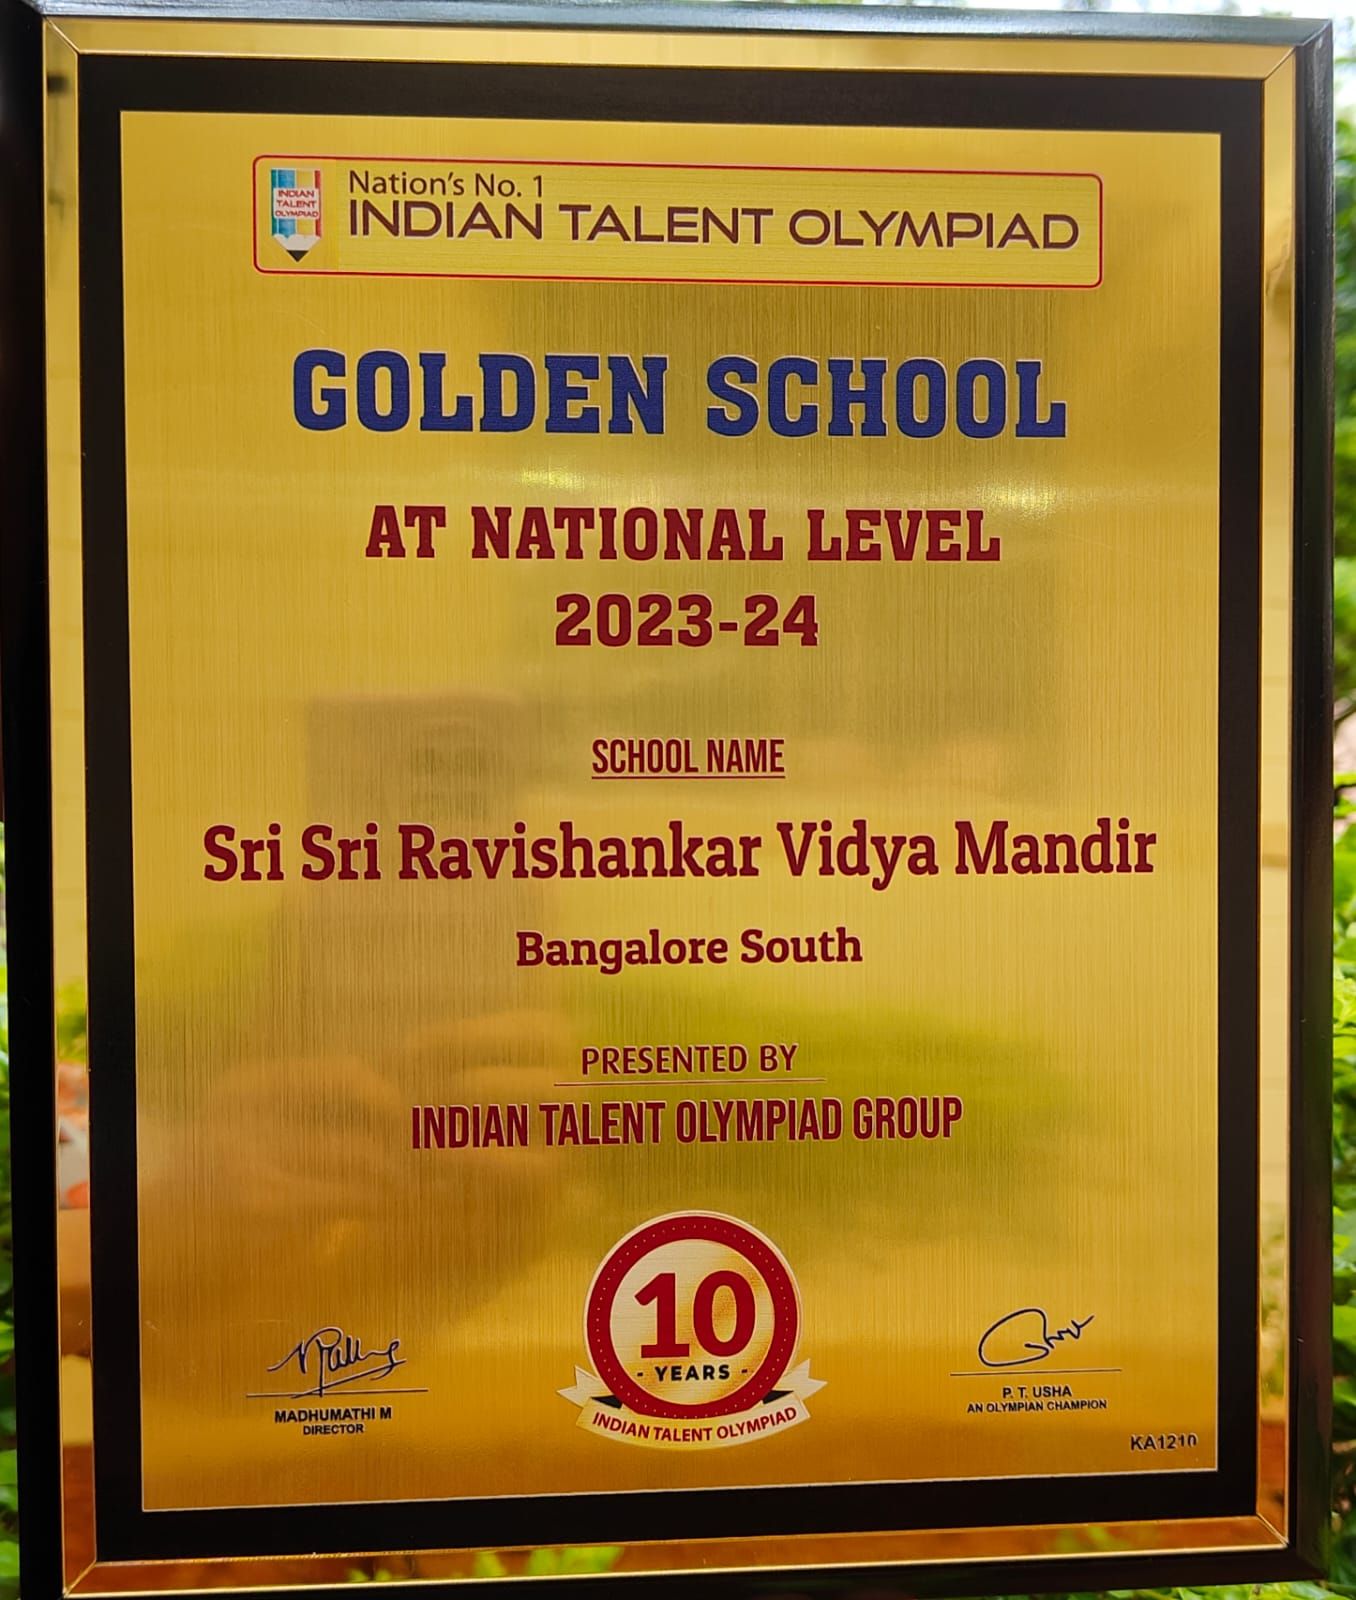 Golden School award at National Level in the year 2023-24